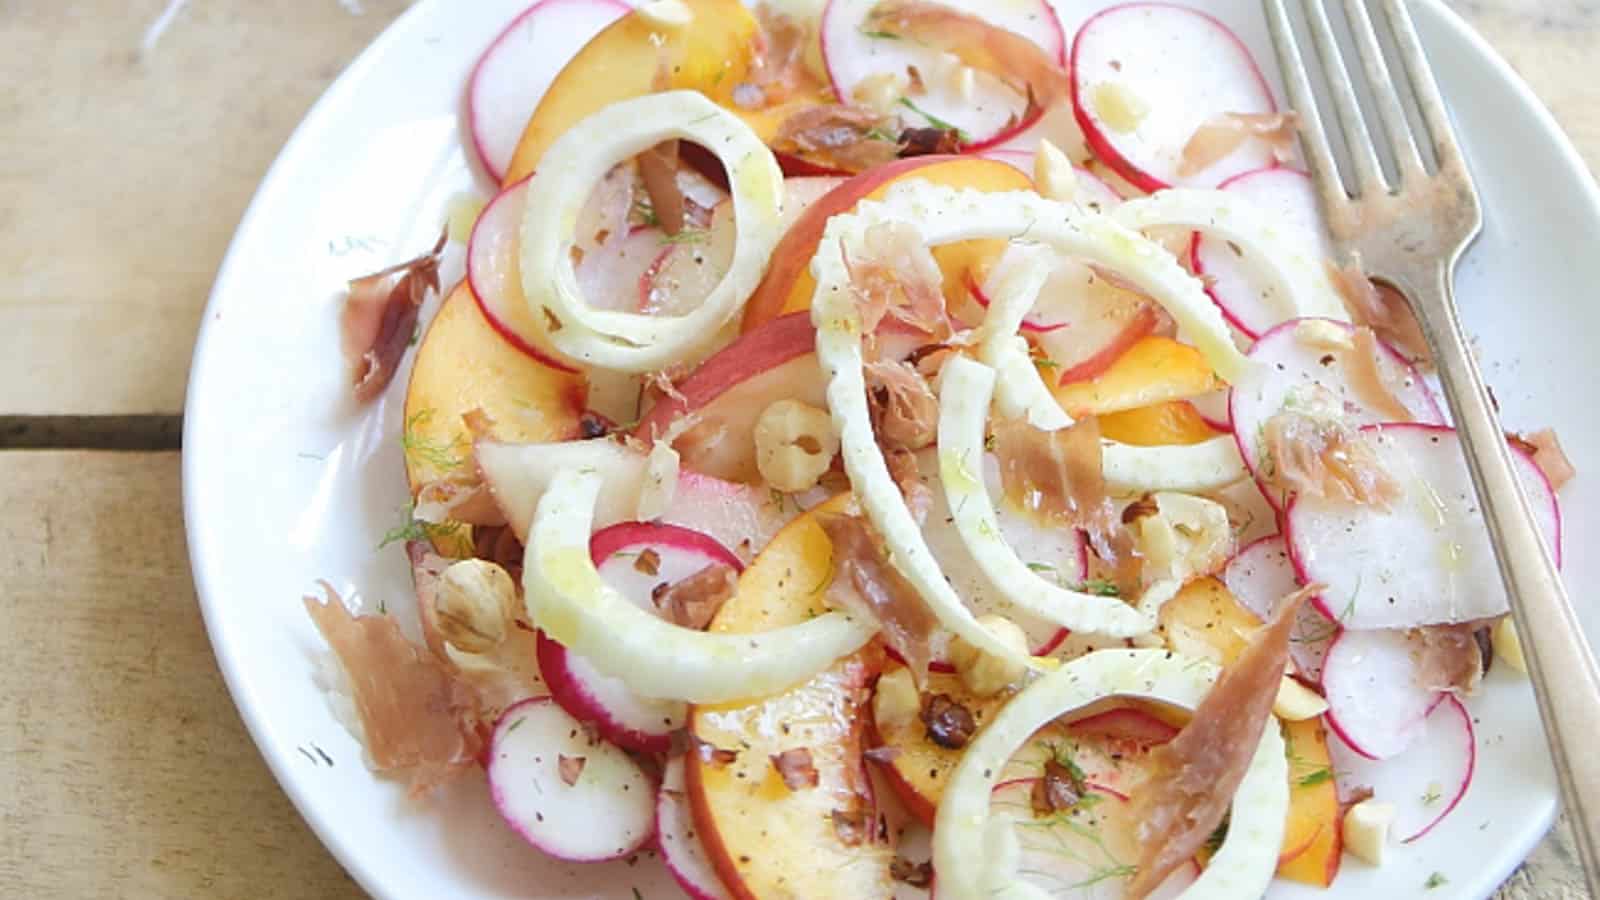 Peach radish salad with crispy prosciutto on a white plate with a fork.